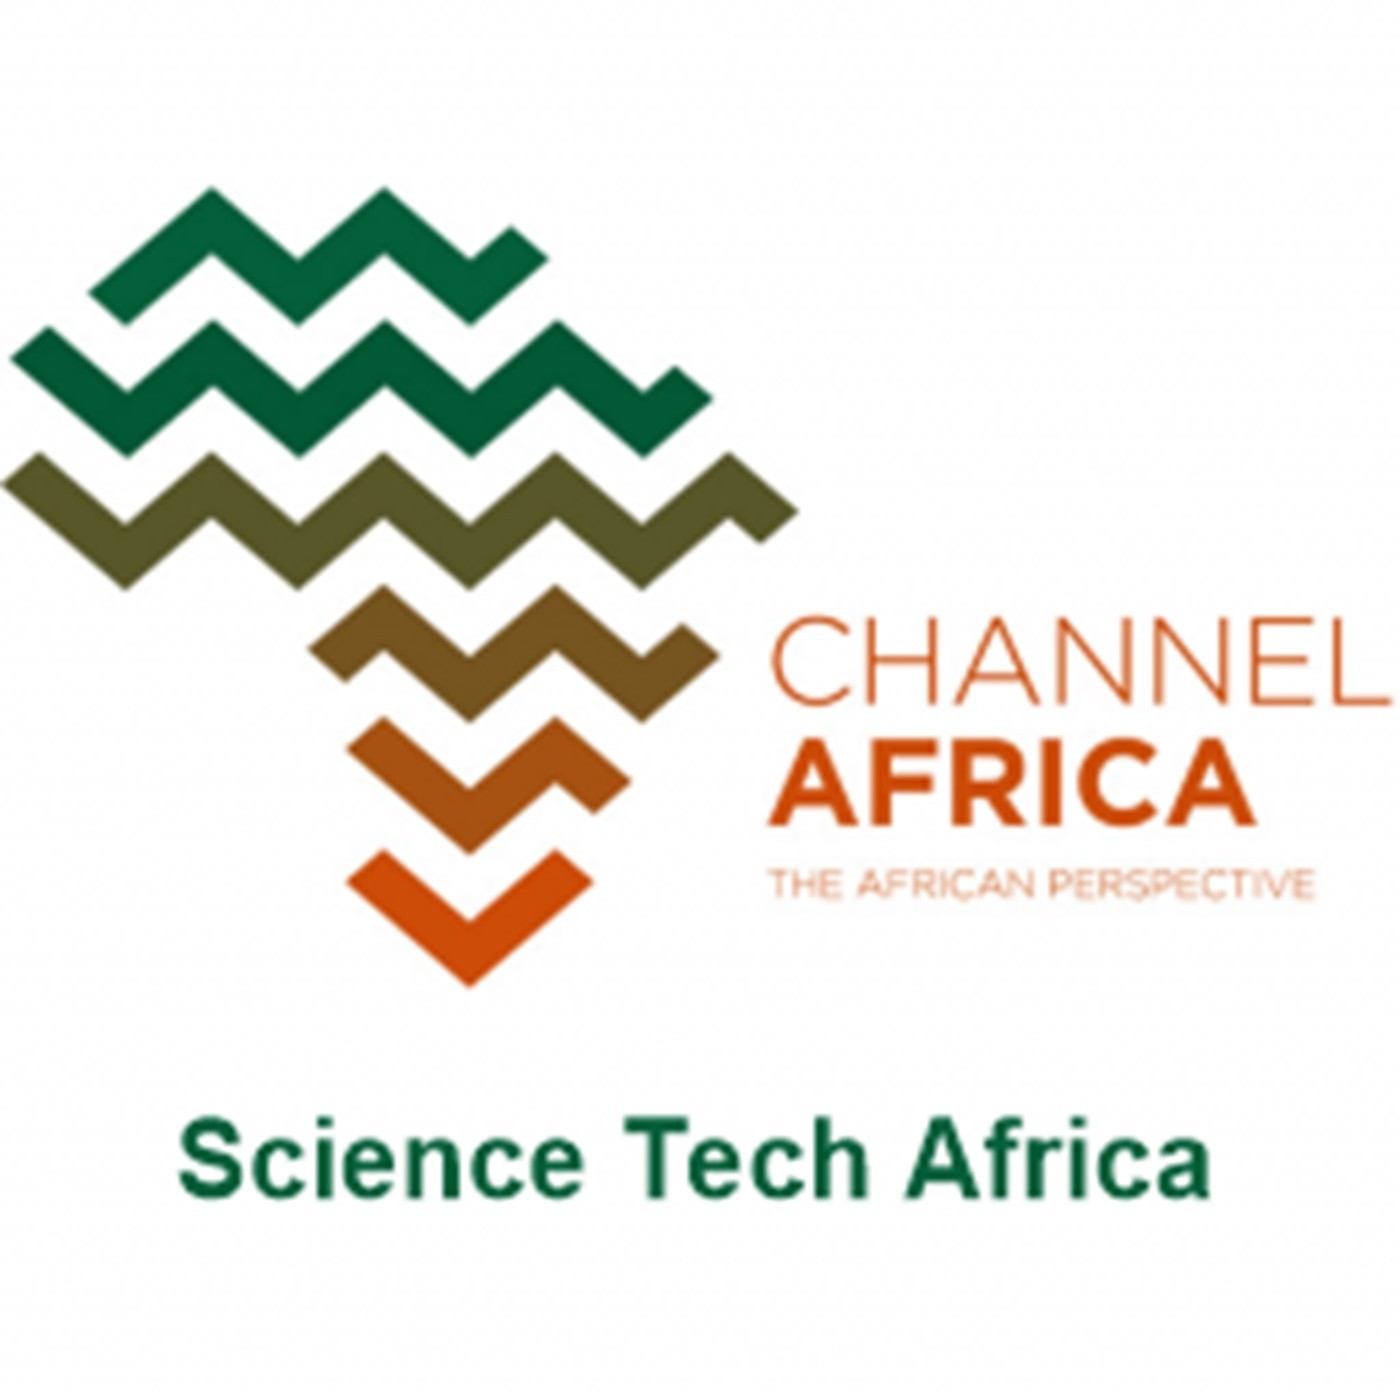 SCIENCE TECH AFRICA 14 MAY 2022